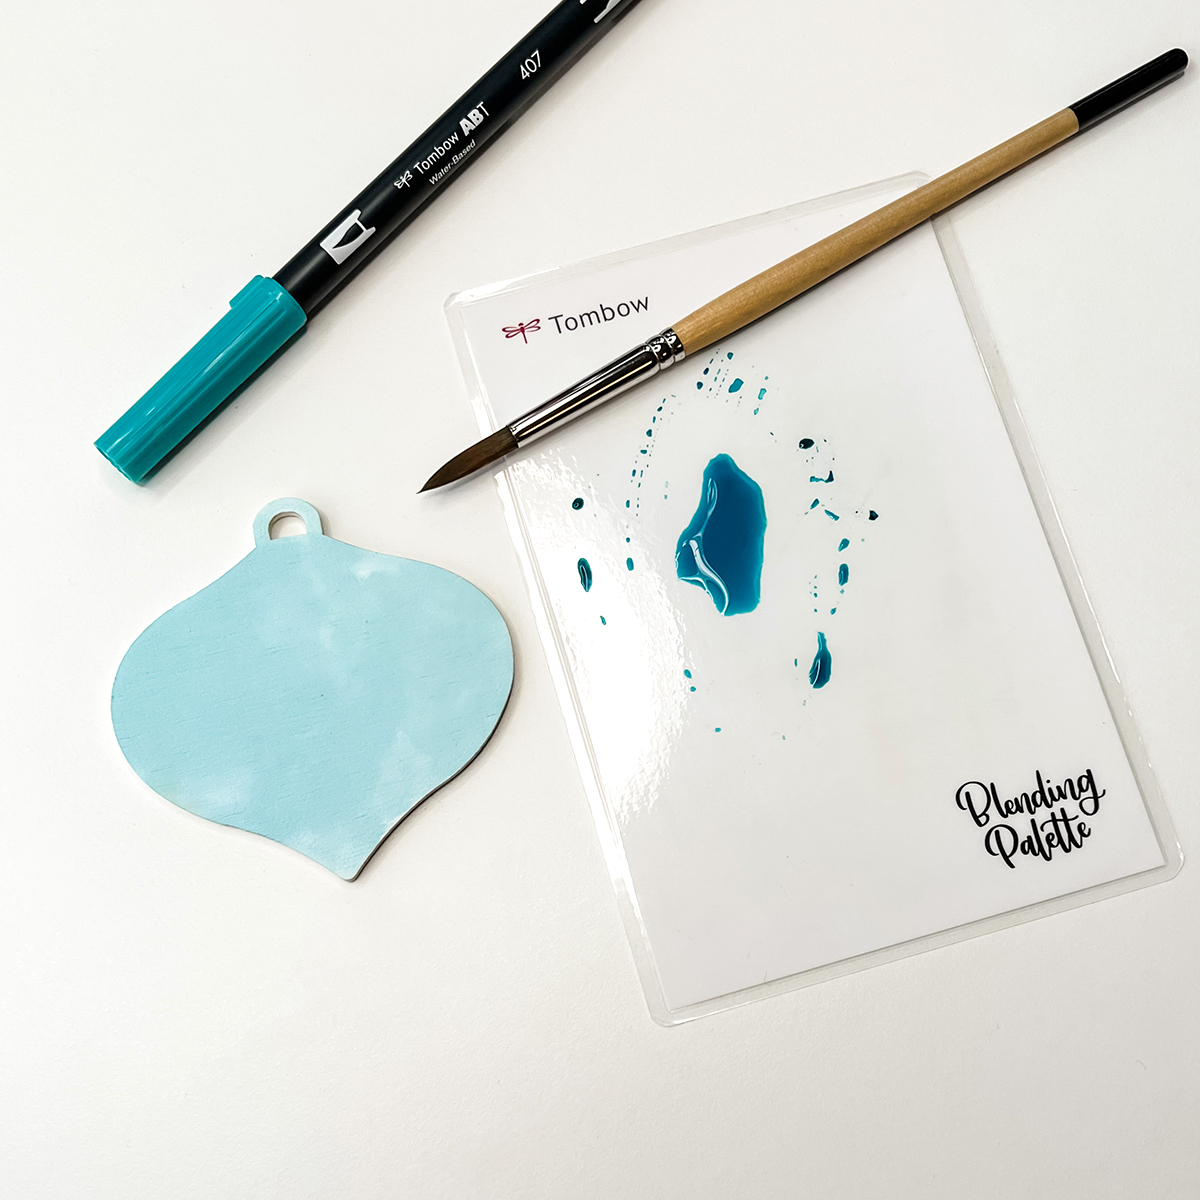 DIY Ornaments with Dual Brush Pens by Jessica Mack on behalf of Tombow